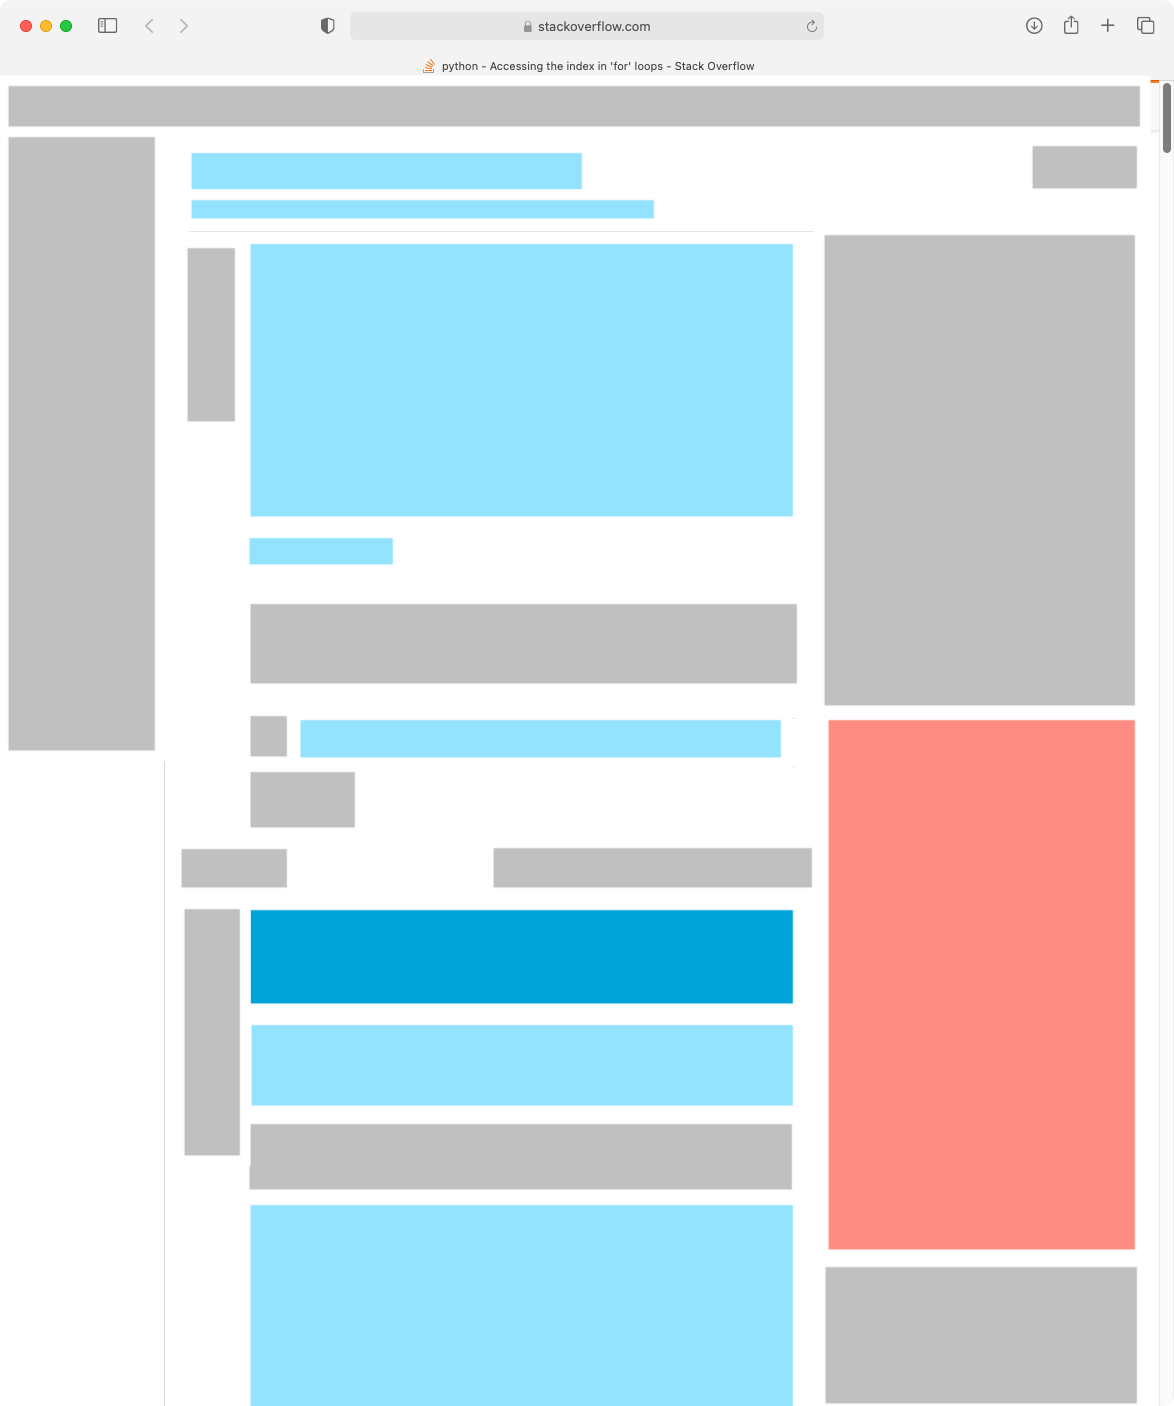 A small rectangle near the middle is dark blue. About a third of the elements are light blue. About half are gray. There is one pink rectangle on the right.